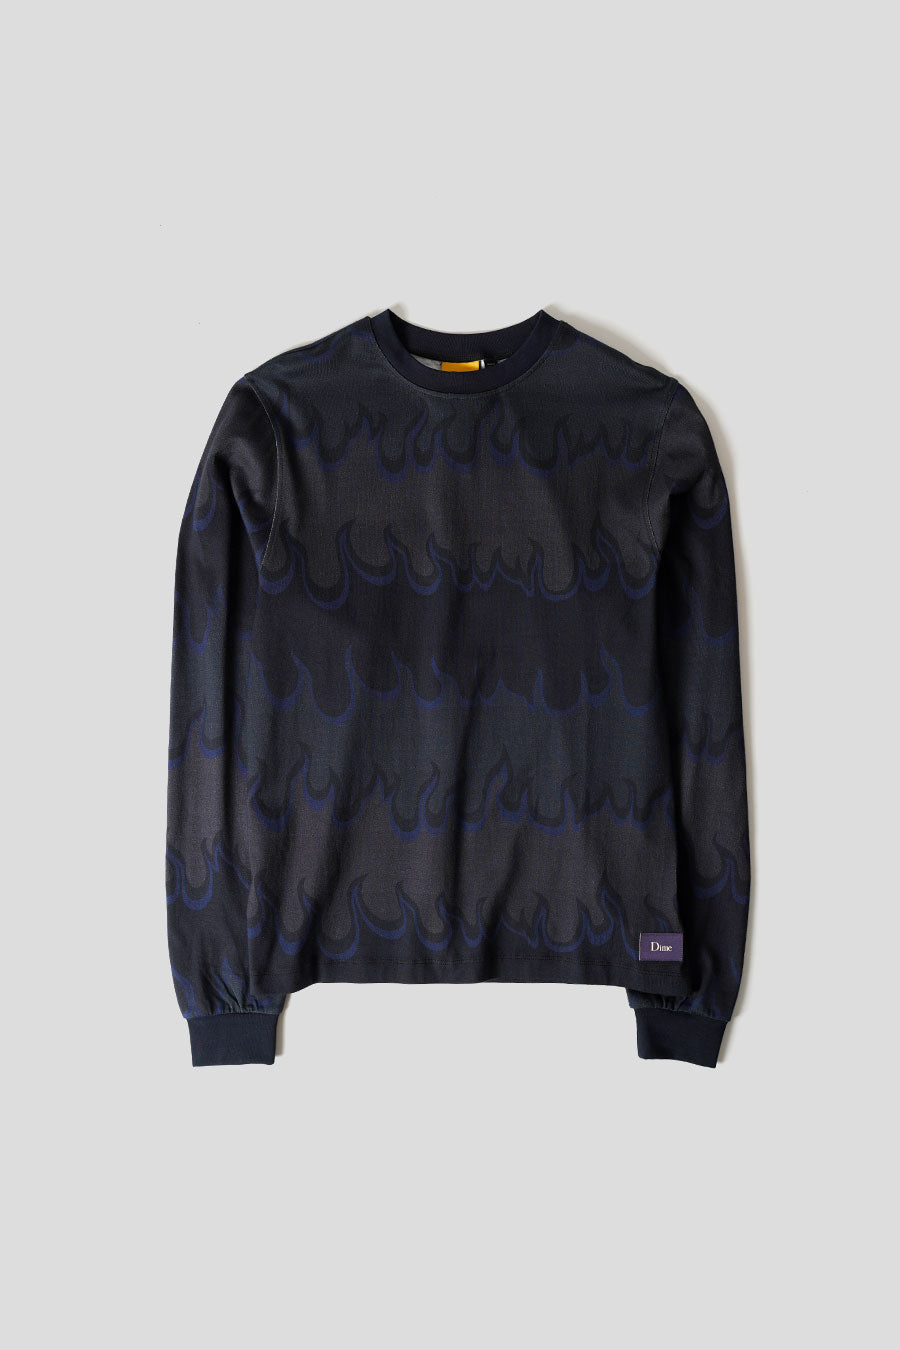 Dime - SPACE FLAME BLACK LONG-SLEEVED T-SHIRT - LE LABO STORE